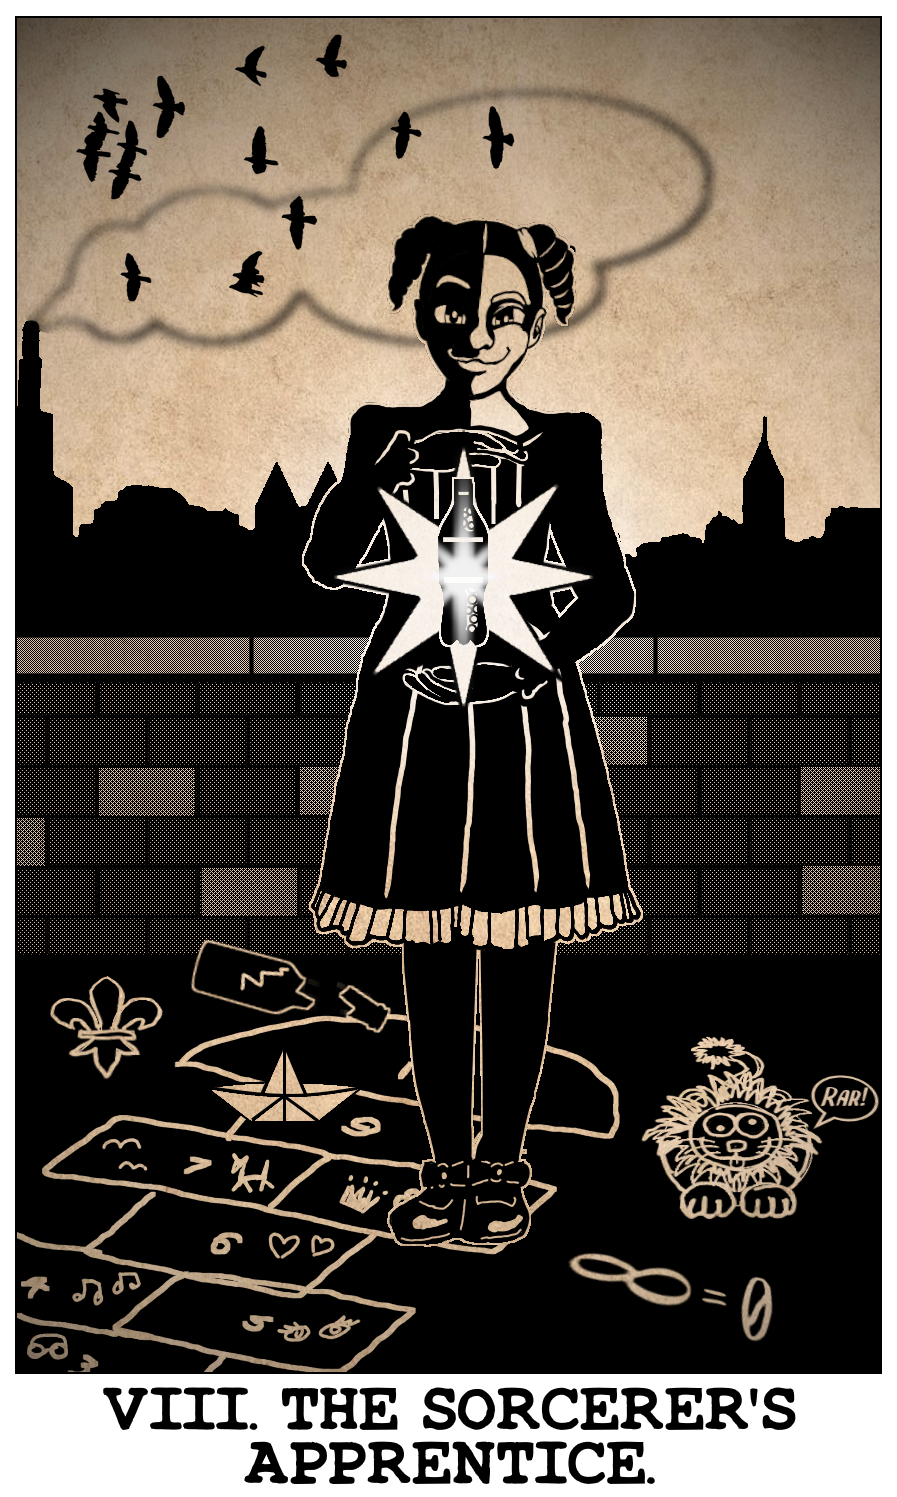 Maggie's Tarot card, The Sorcerer's Apprentice, based on Strength. She appears in Strawberry Square, with a bottle of soda, which she has magicked to levitate and glow. She seems pleased with herself.